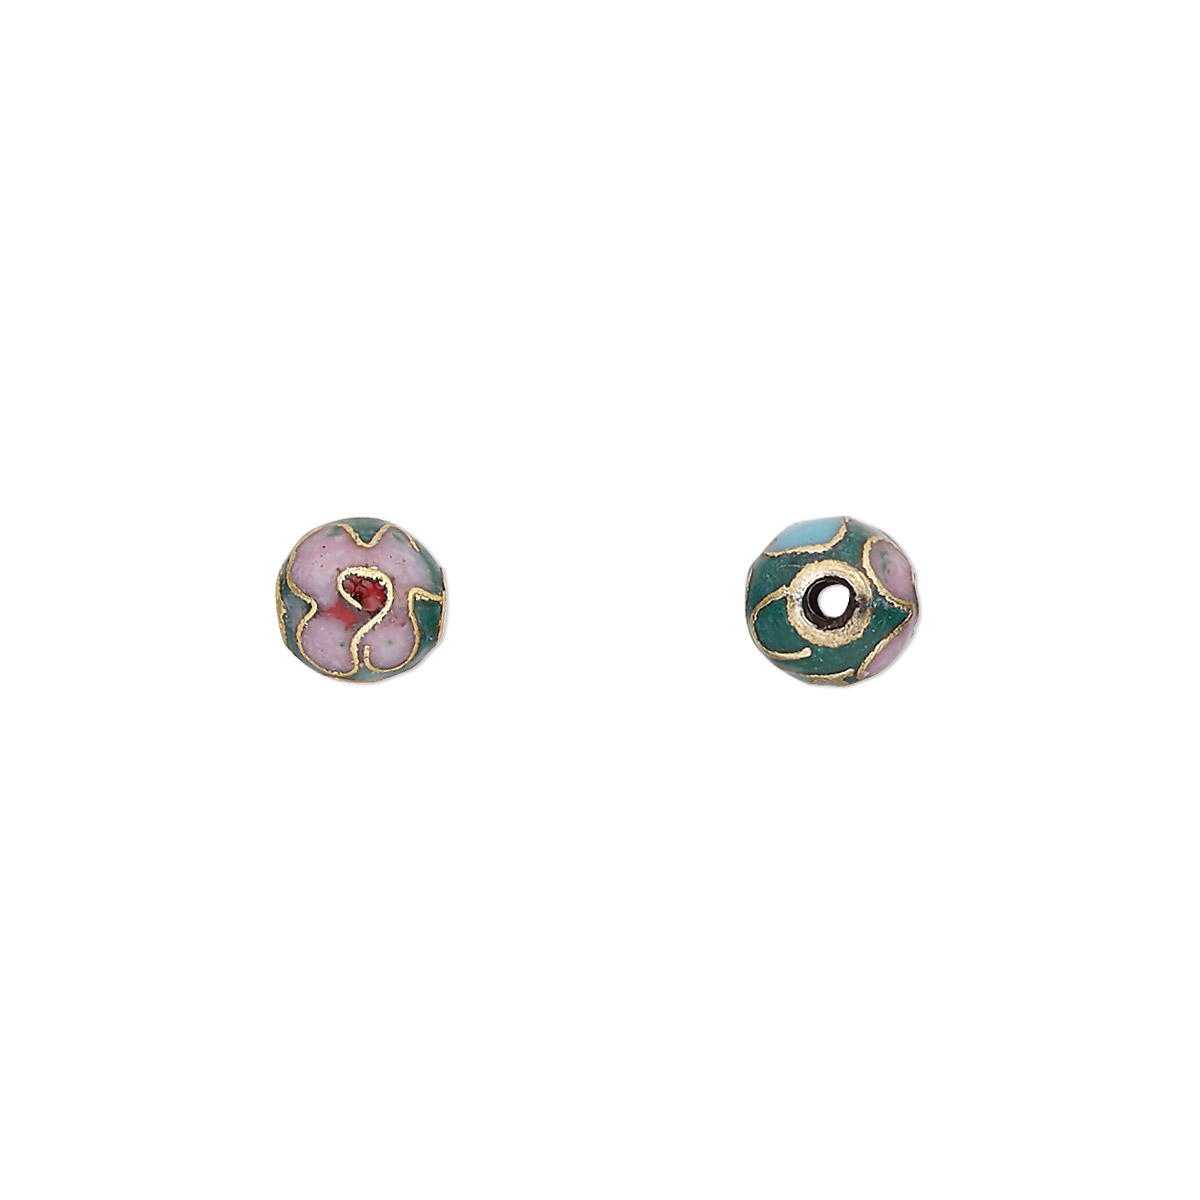 Bead, cloisonné, enamel and gold-finished copper, pink / red / green ...